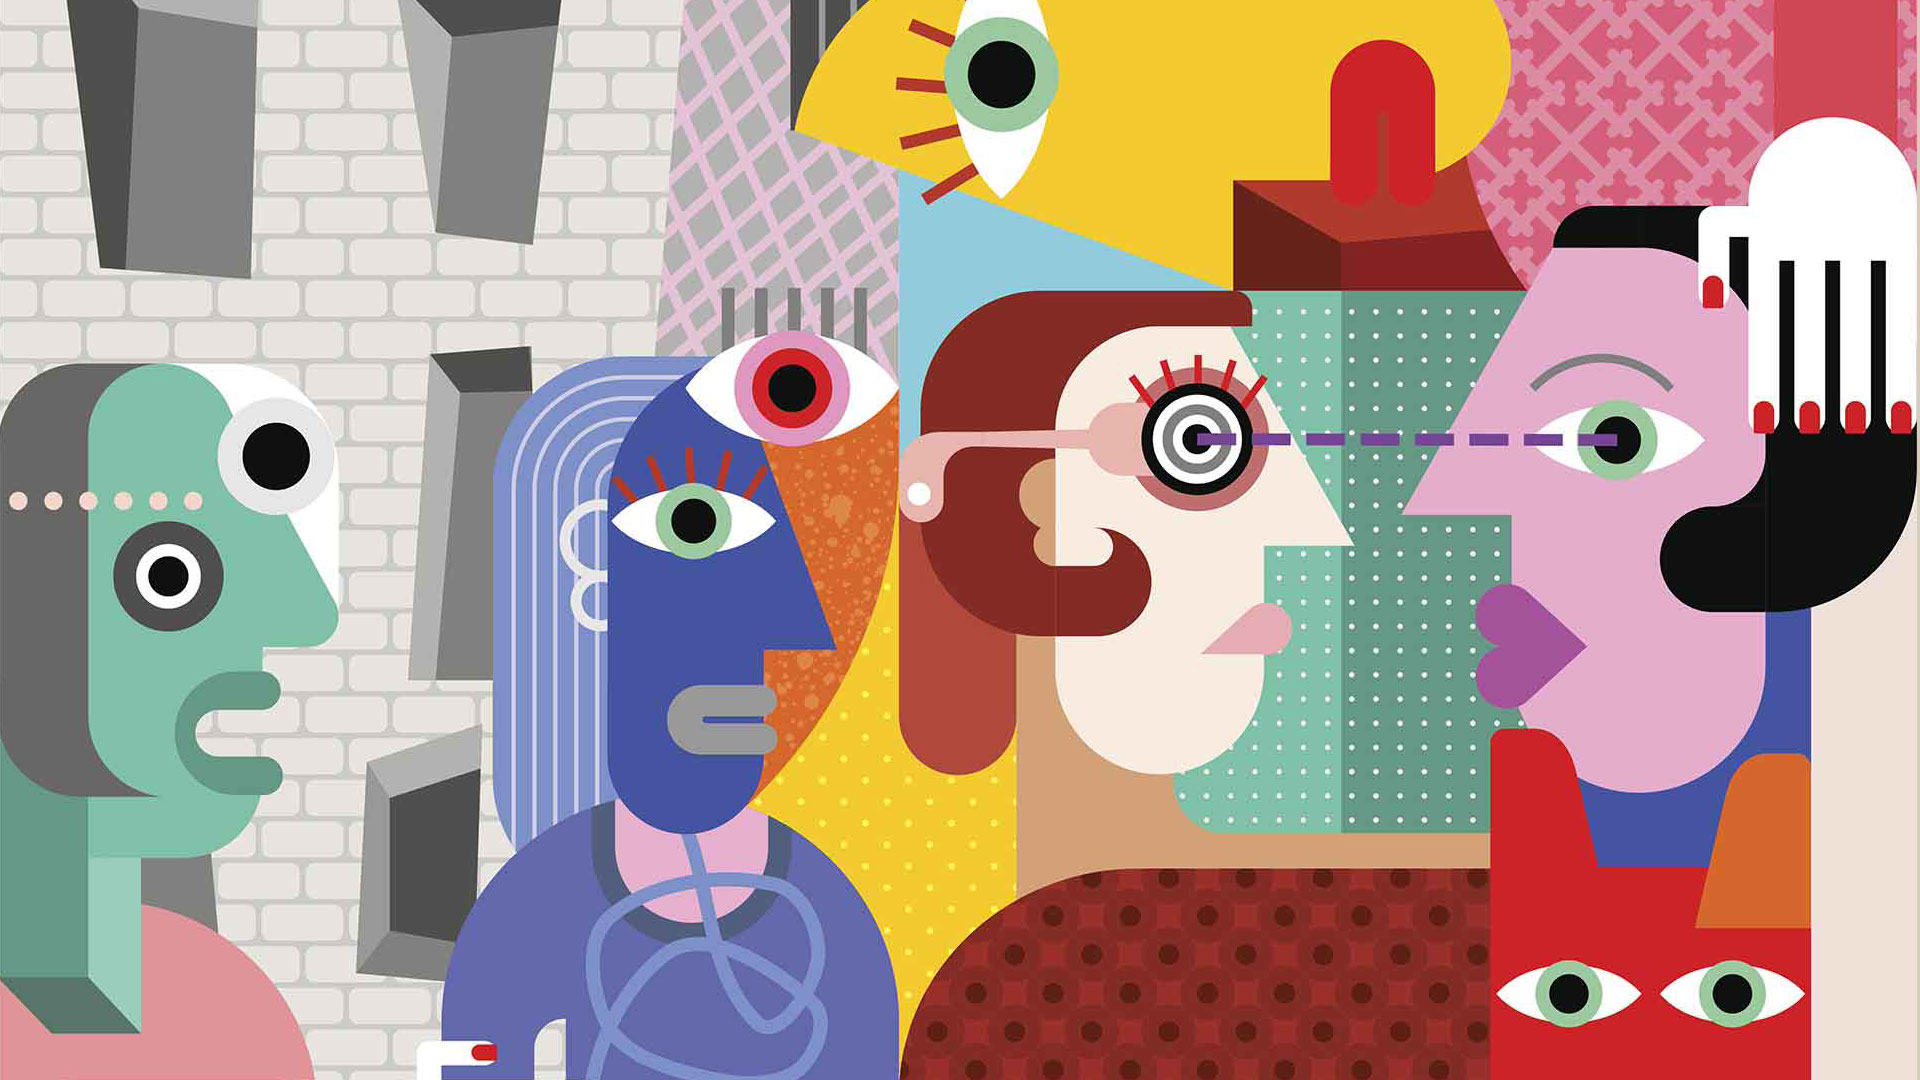 cubist illustration showing diverse people of different colour and gender